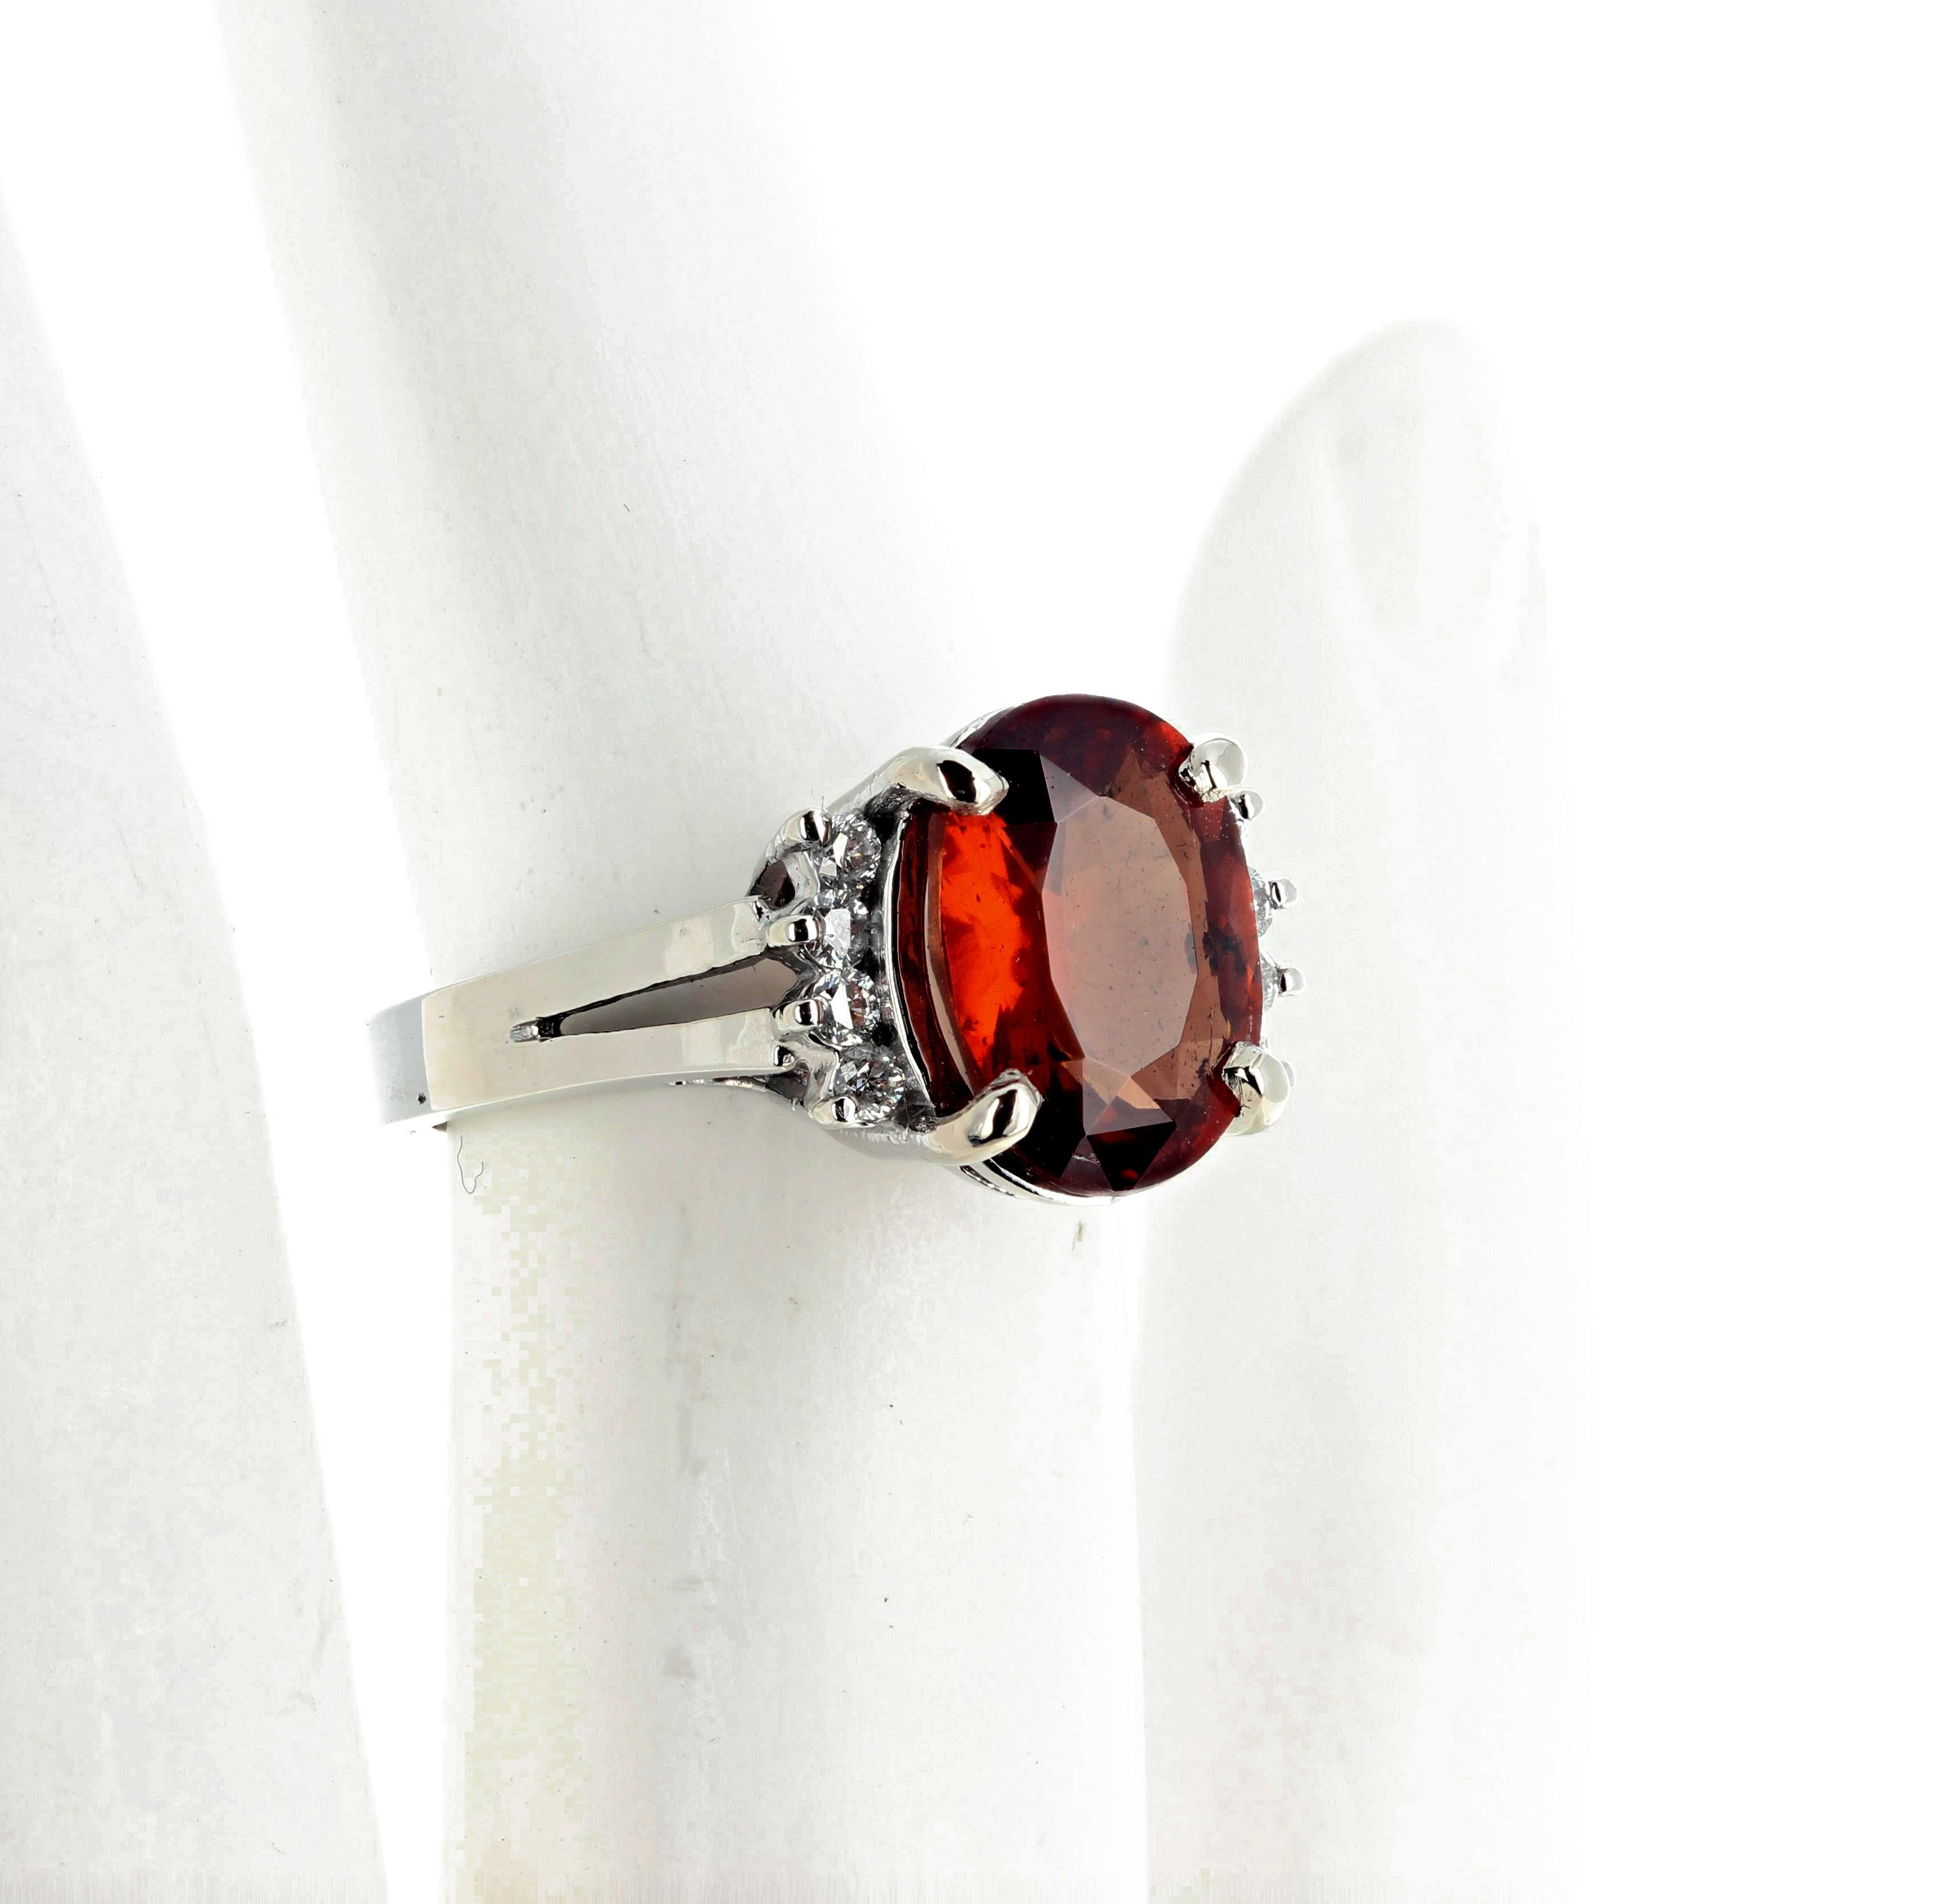 Bright unique glittering Reddish (slight tinge of orangy glitter) 5.1 carats of natural Zircon enhanced with 0.22 carats of white diamonds set in a 14K white gold ring size 7 (sizable FOR FREE).  The Zircon is a 9 x 7 gemstone. 